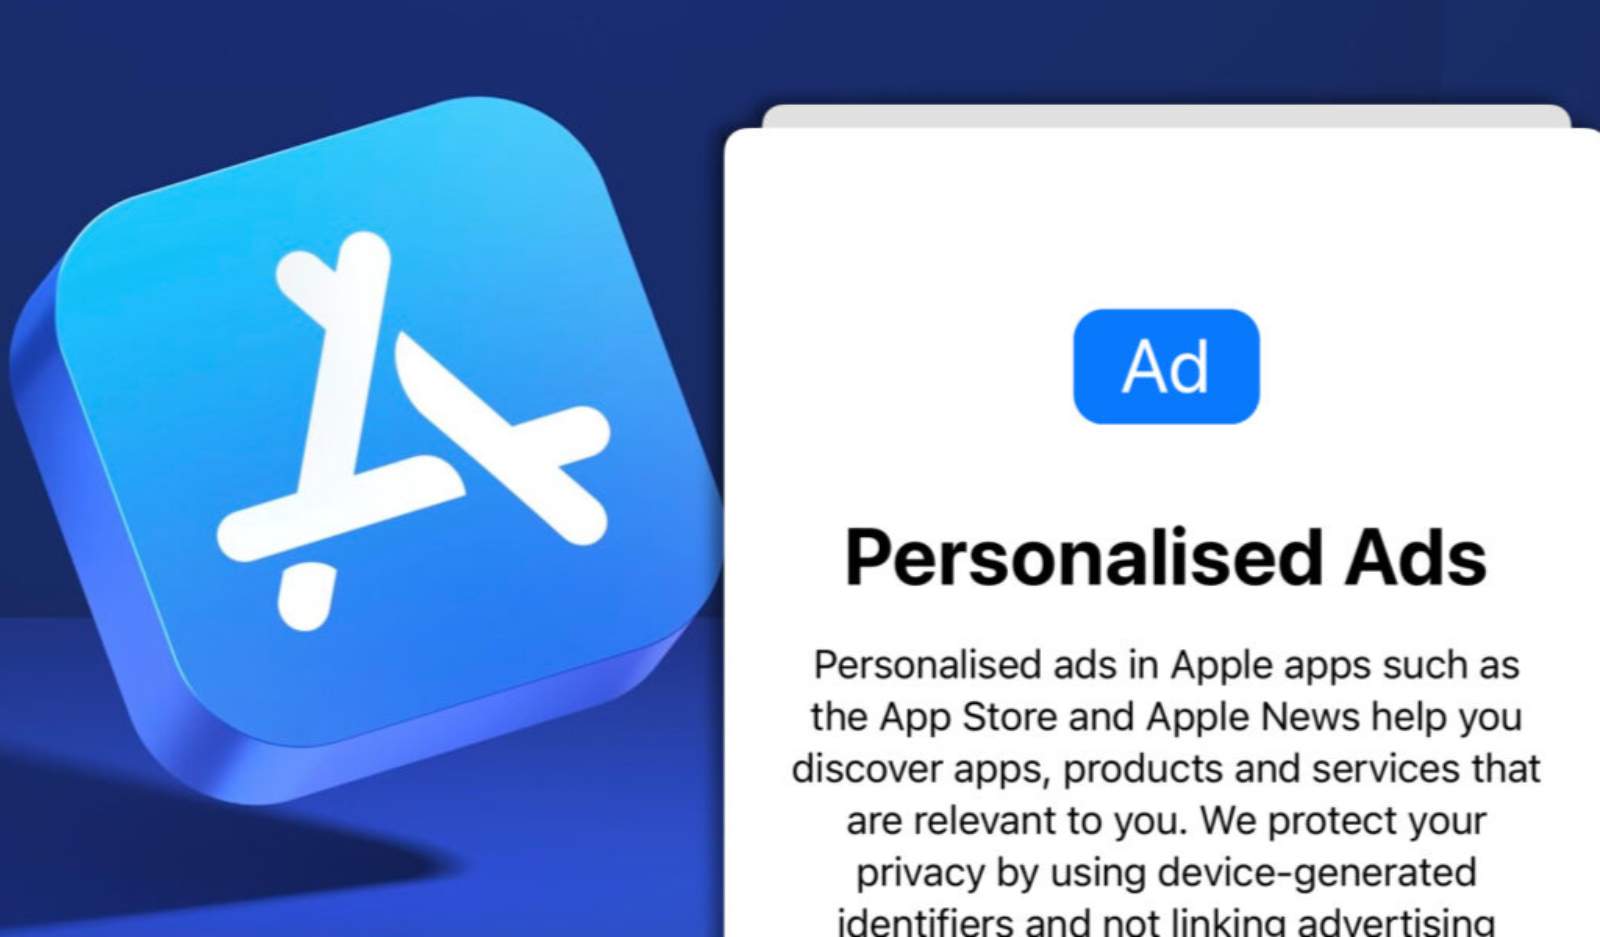 Apple Will Now Ask Permission Before Showing Its Own Targeted Ads